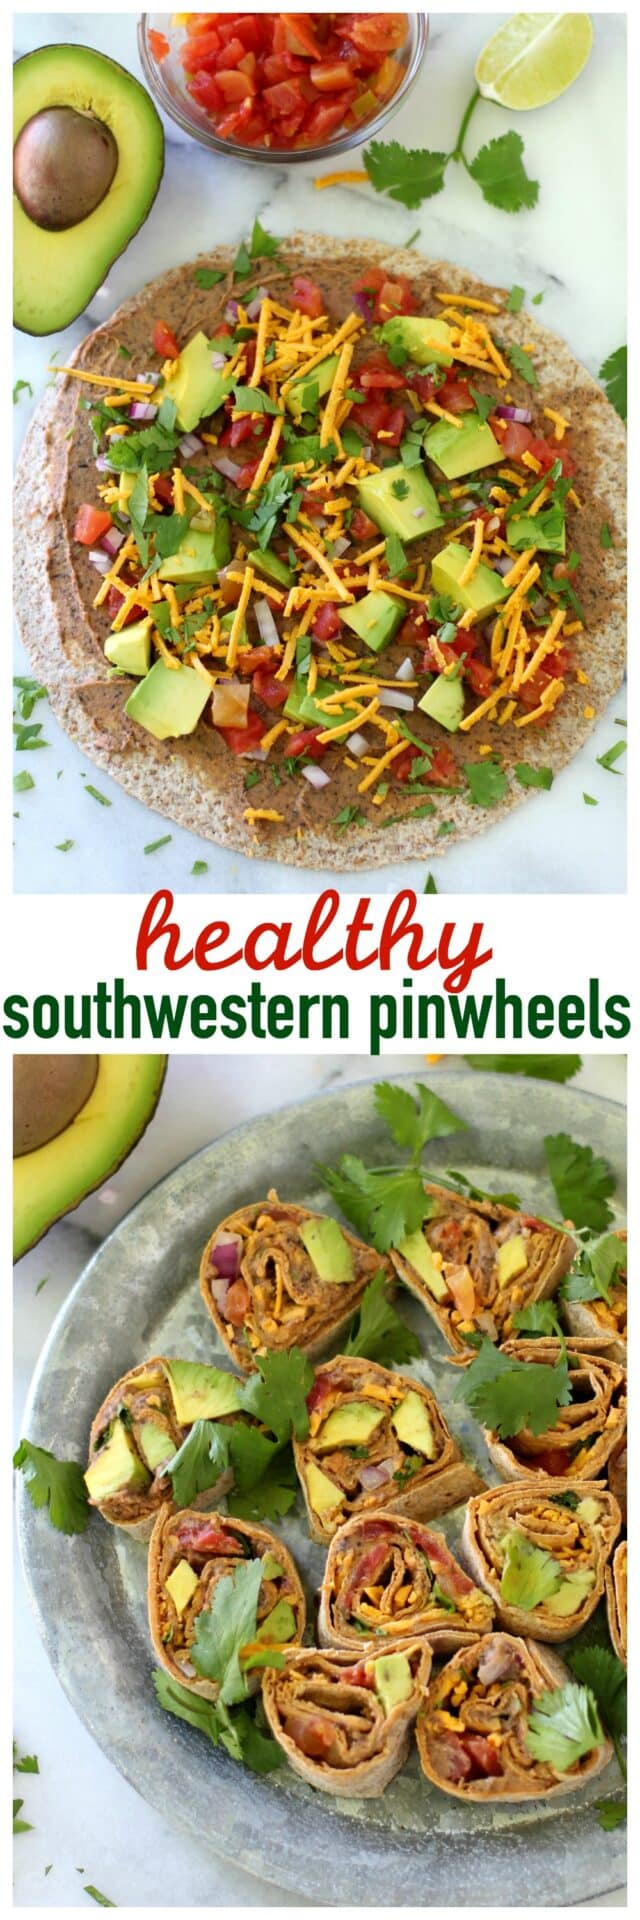 Healthy Southwestern Pinwheels are the perfect appetizer for summertime parties and they even make for a fun lunch or snack idea. These crowd pleasers are super yummy, easy to make and can even be prepared ahead of time.